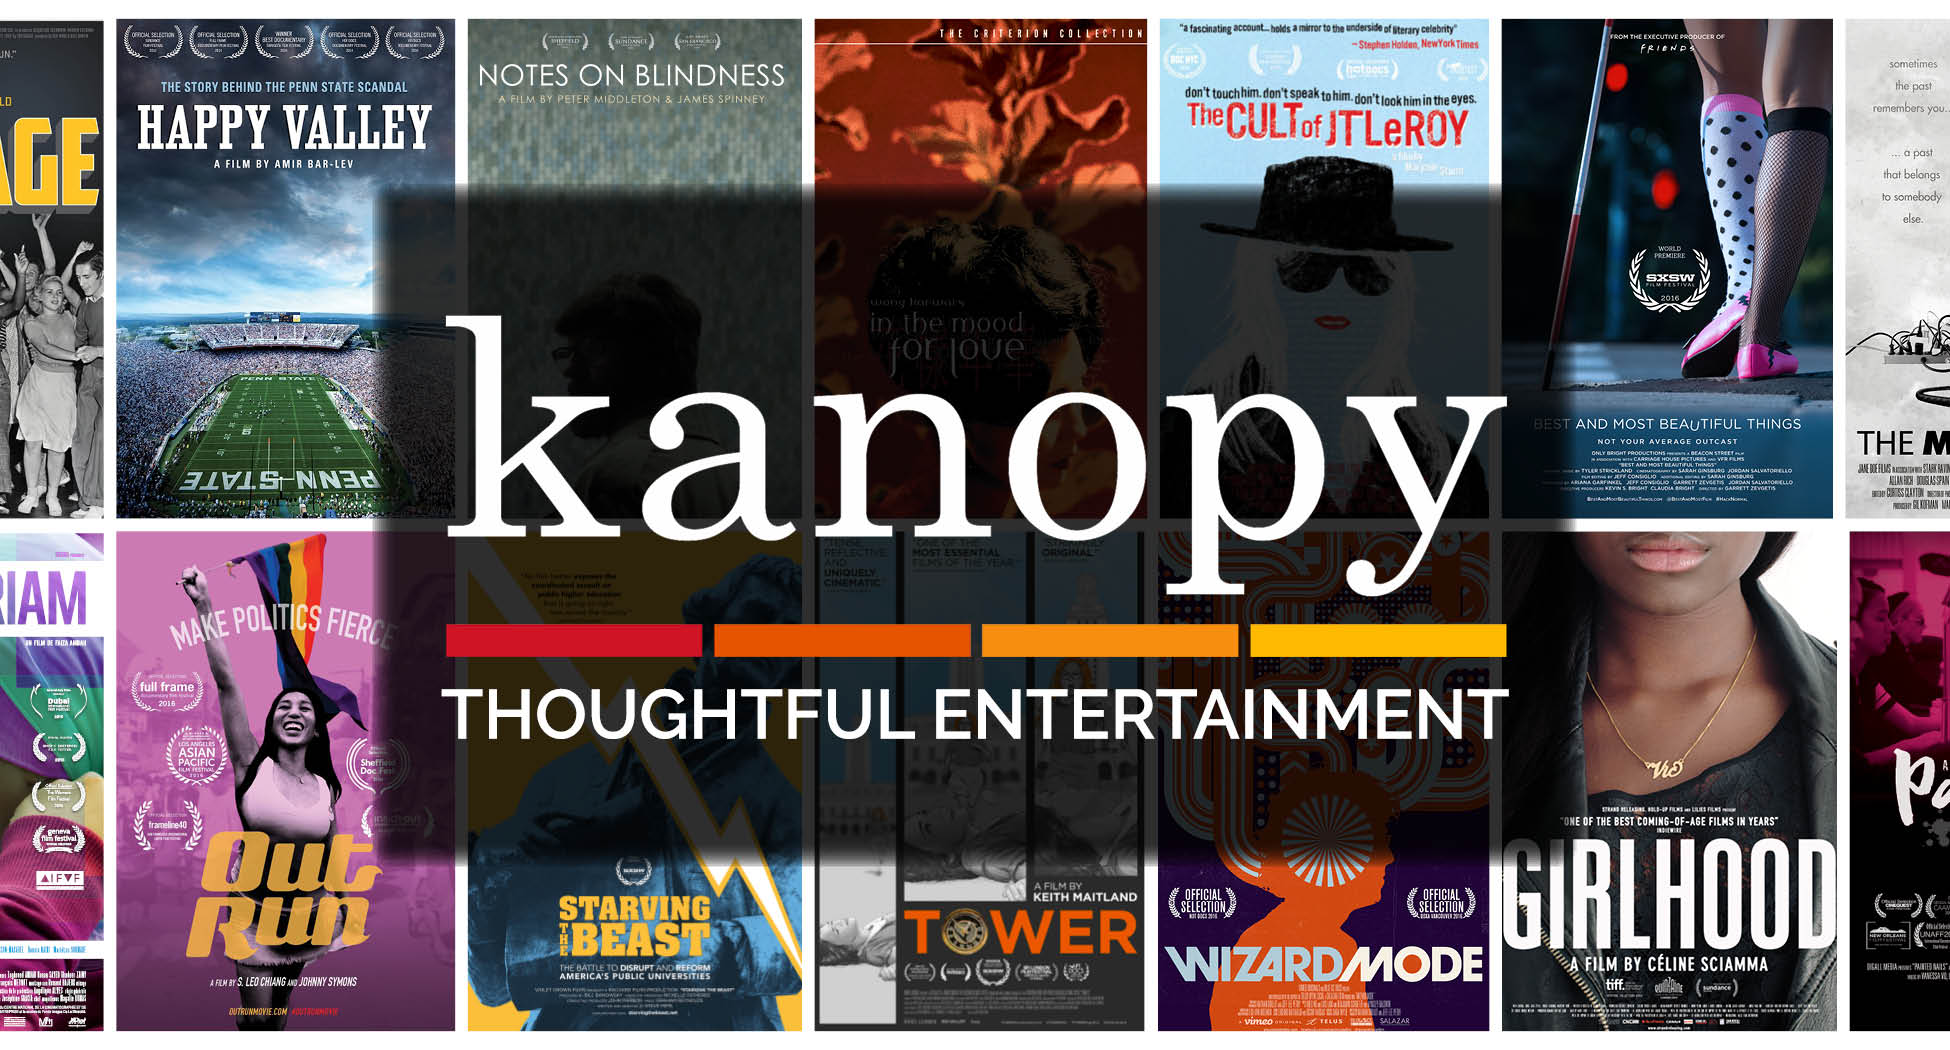 image of kanopy banner